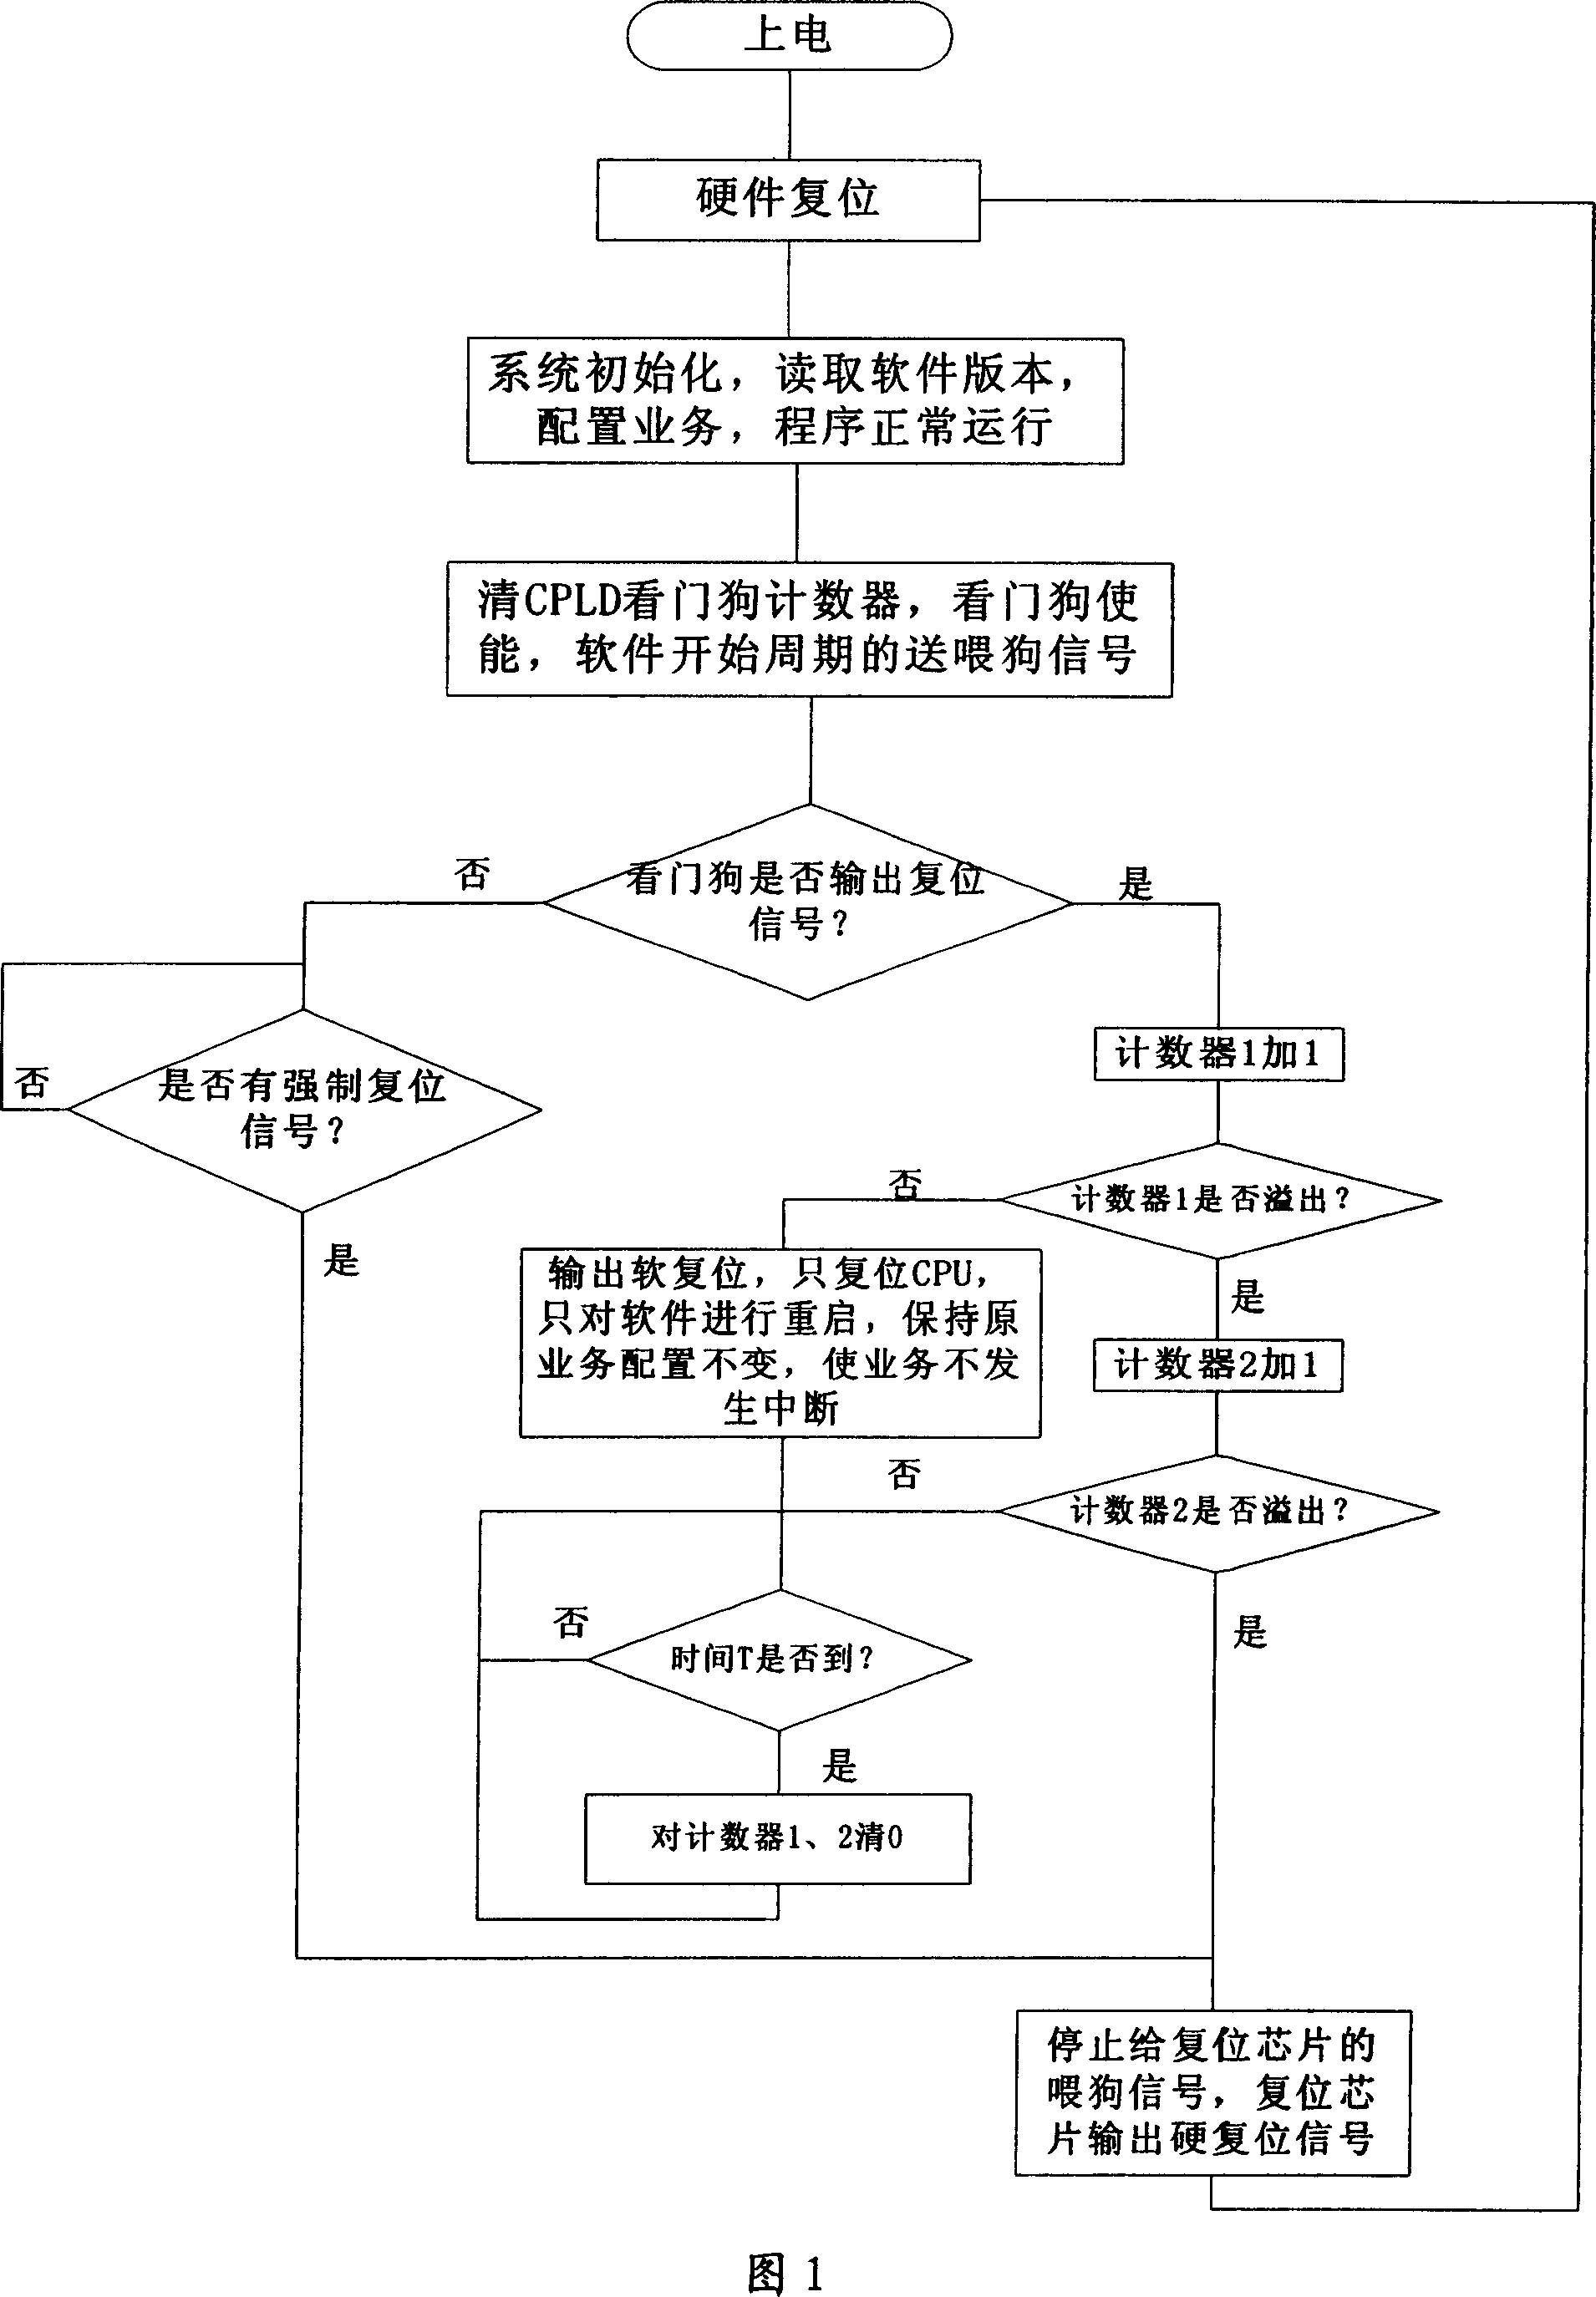 Resetting method for preventing system from dead to stop operation by associating software and hardware